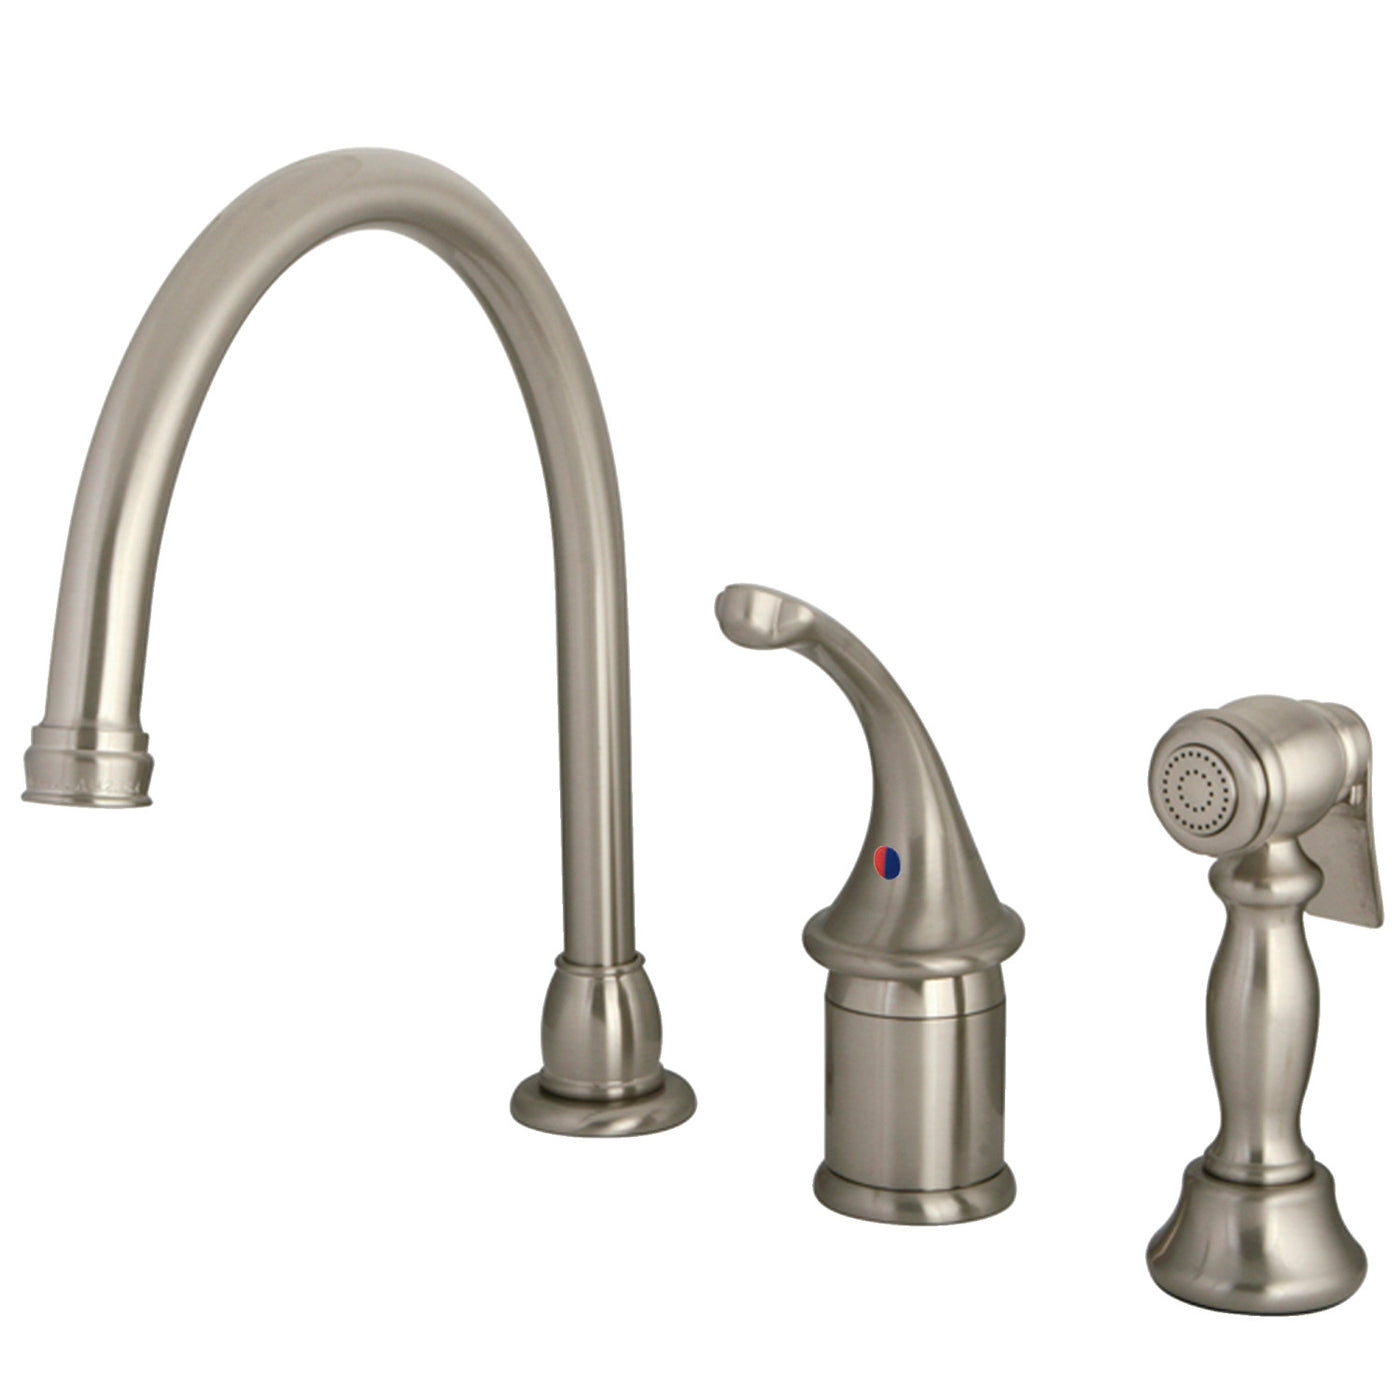 Elements of Design EB3818GLBS Single-Handle Widespread Kitchen Faucet with Brass Sprayer, Brushed Nickel